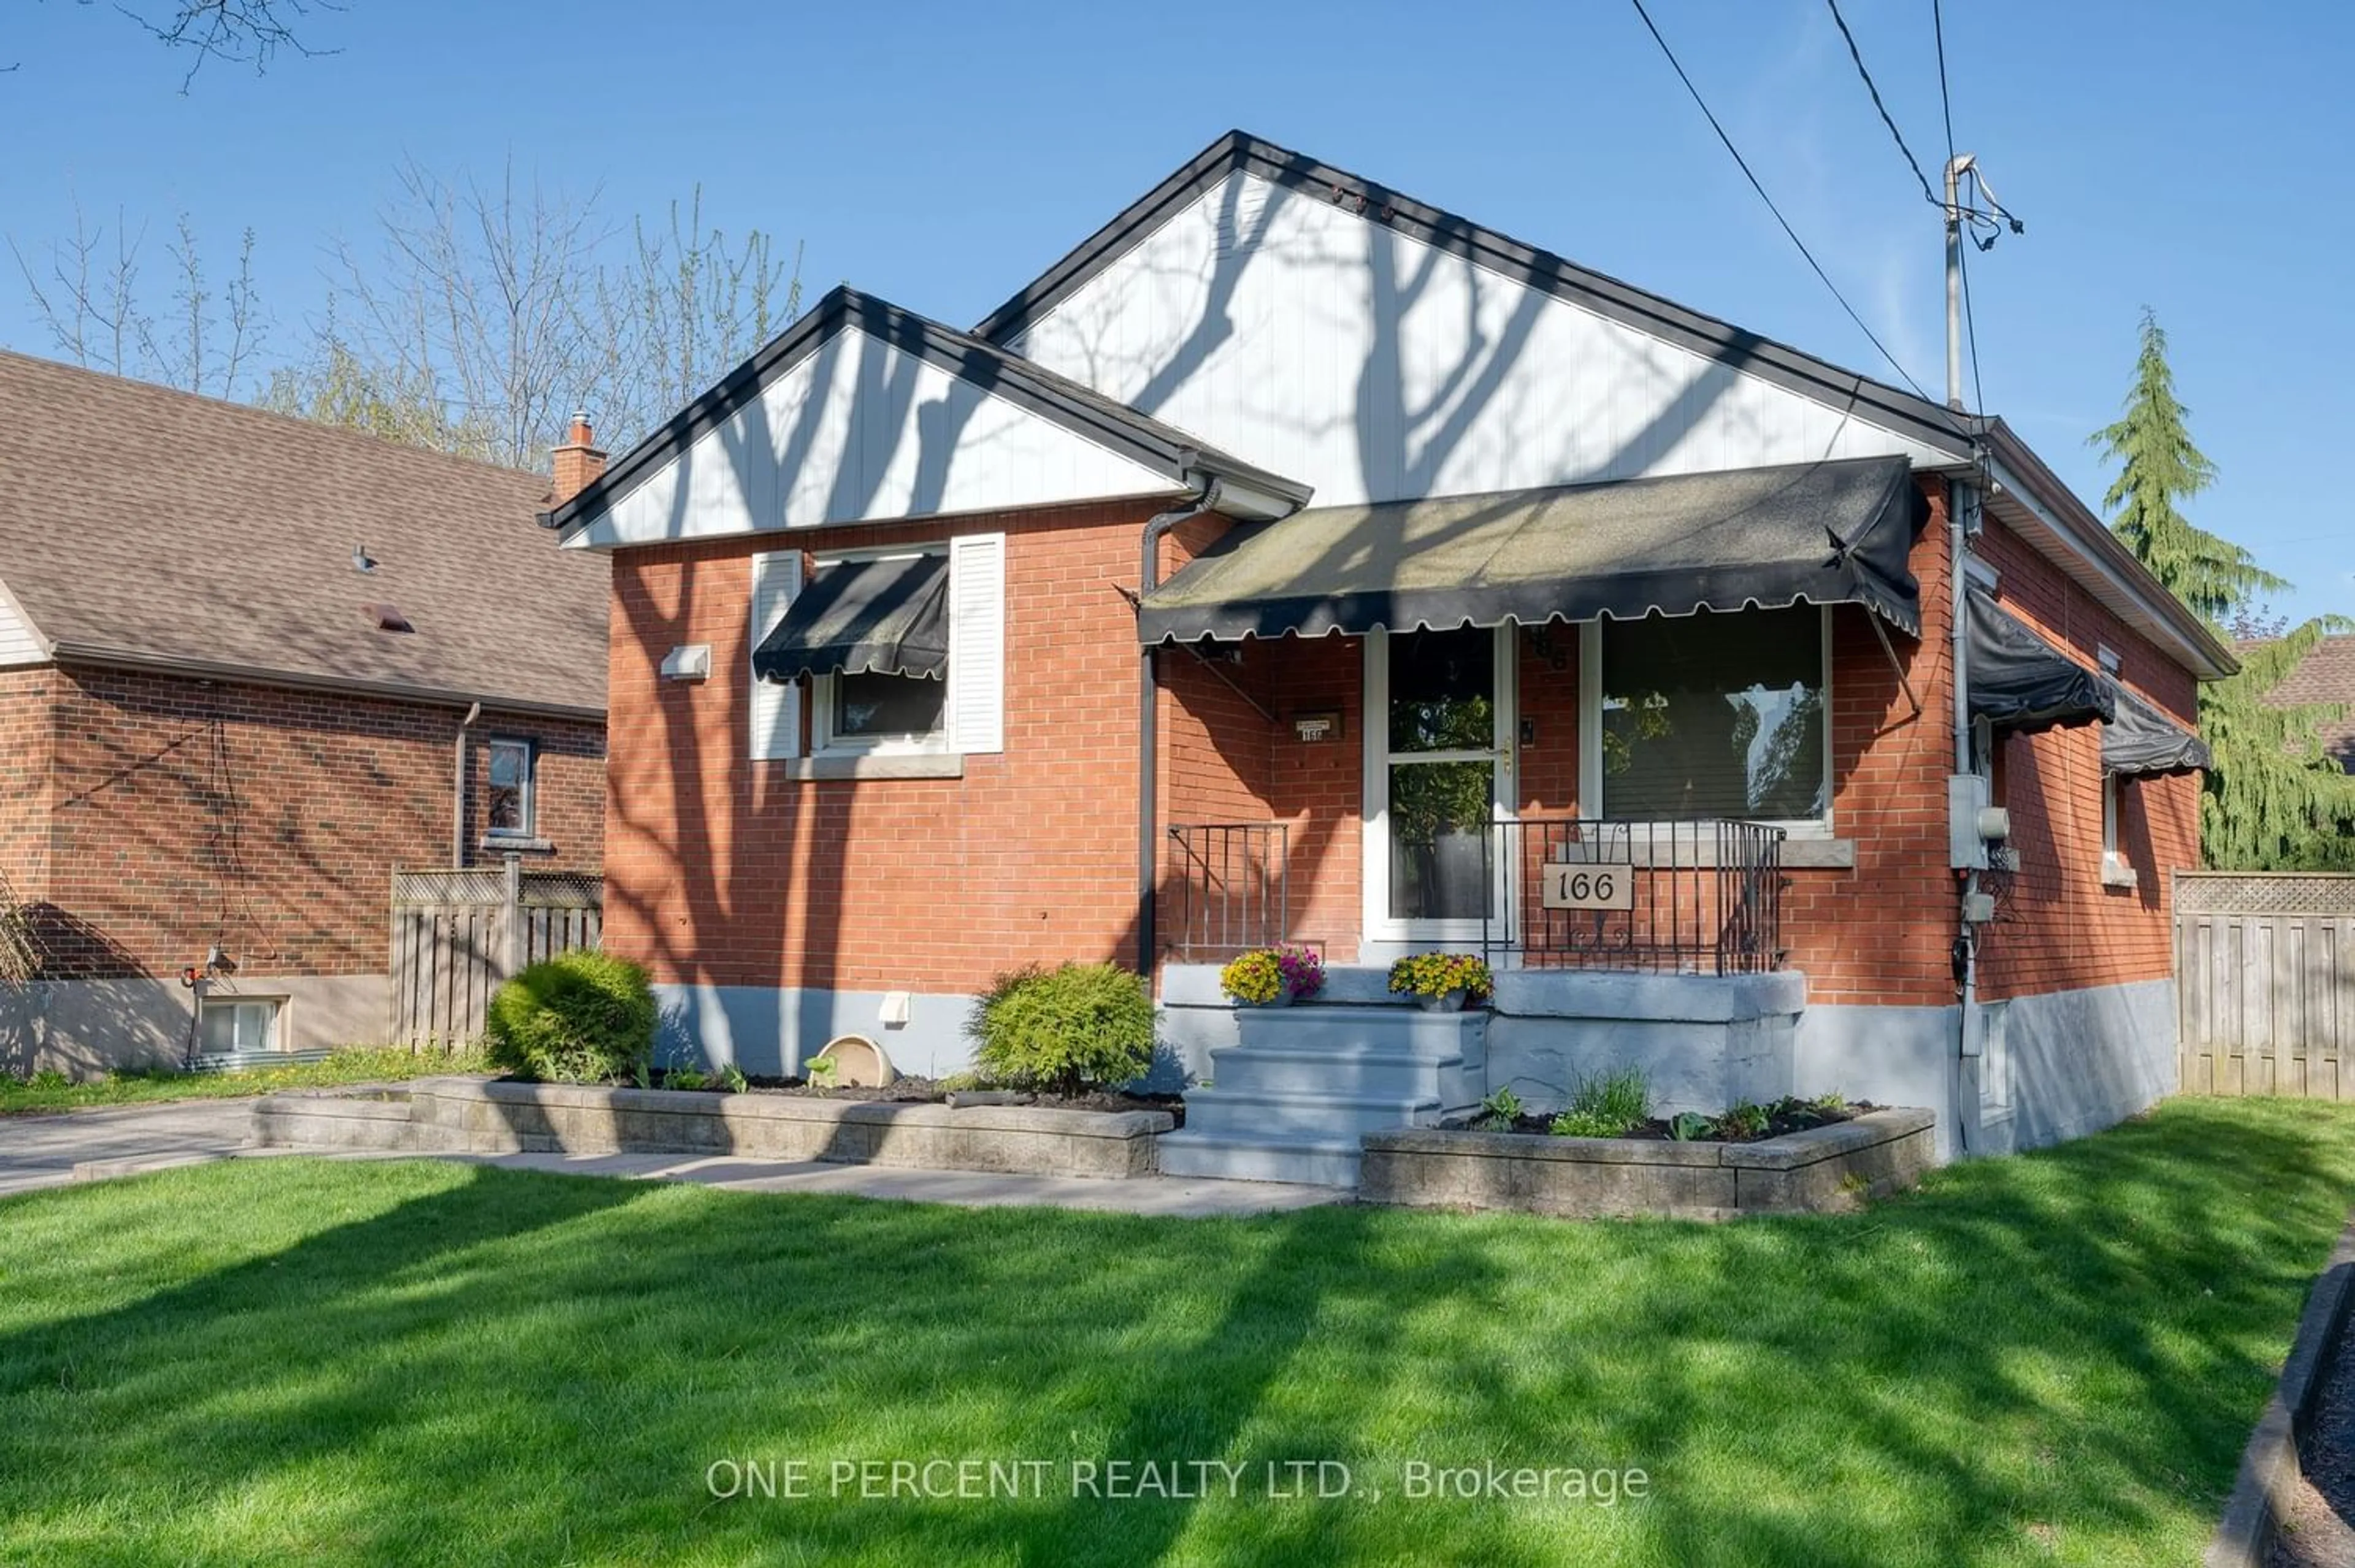 Home with brick exterior material for 166 East 34th St, Hamilton Ontario L8V 3W6